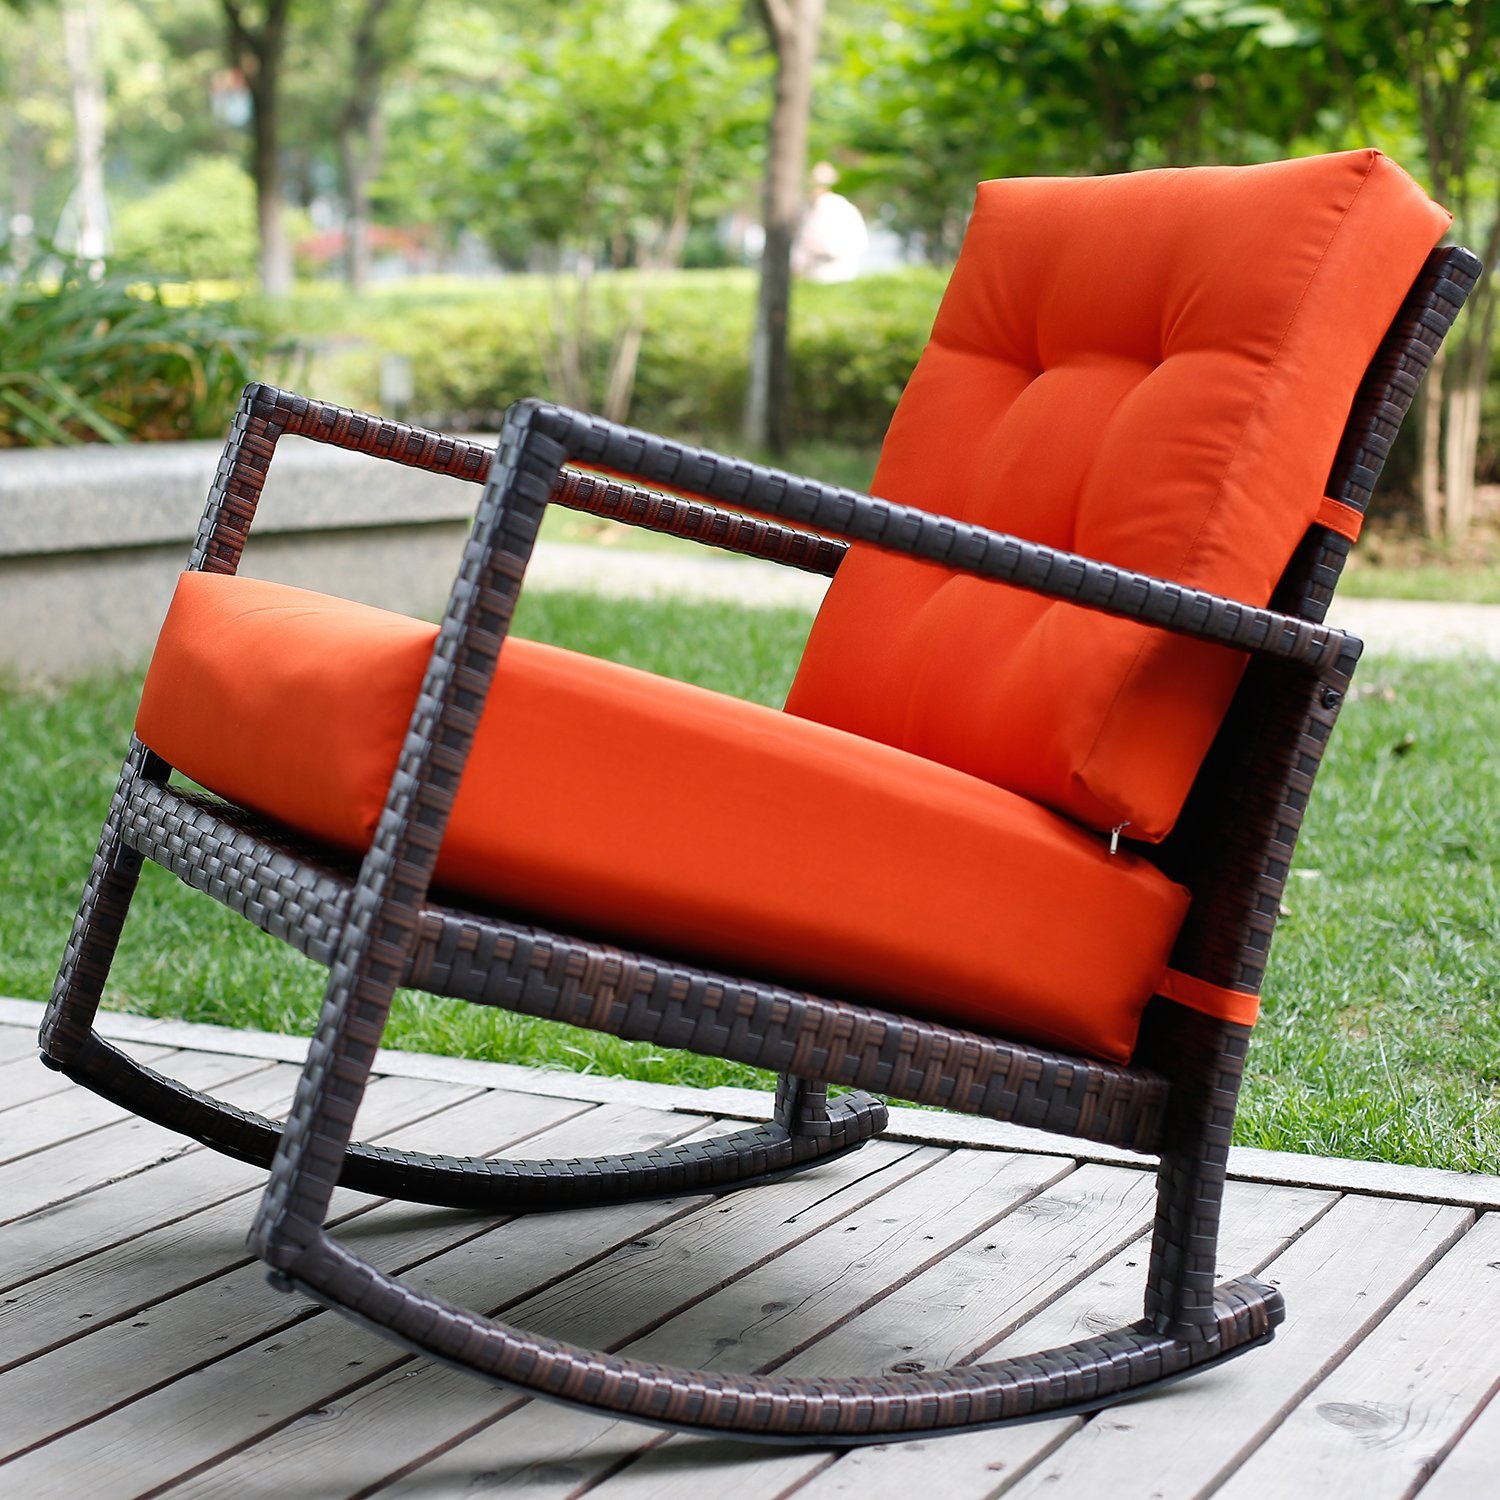 Merax Cushioned Rattan Rocker Chair Rocking Armchair Chair Outdoor Patio Glider Lounge Wicker Chair Furniture with Cushion - image 1 of 4